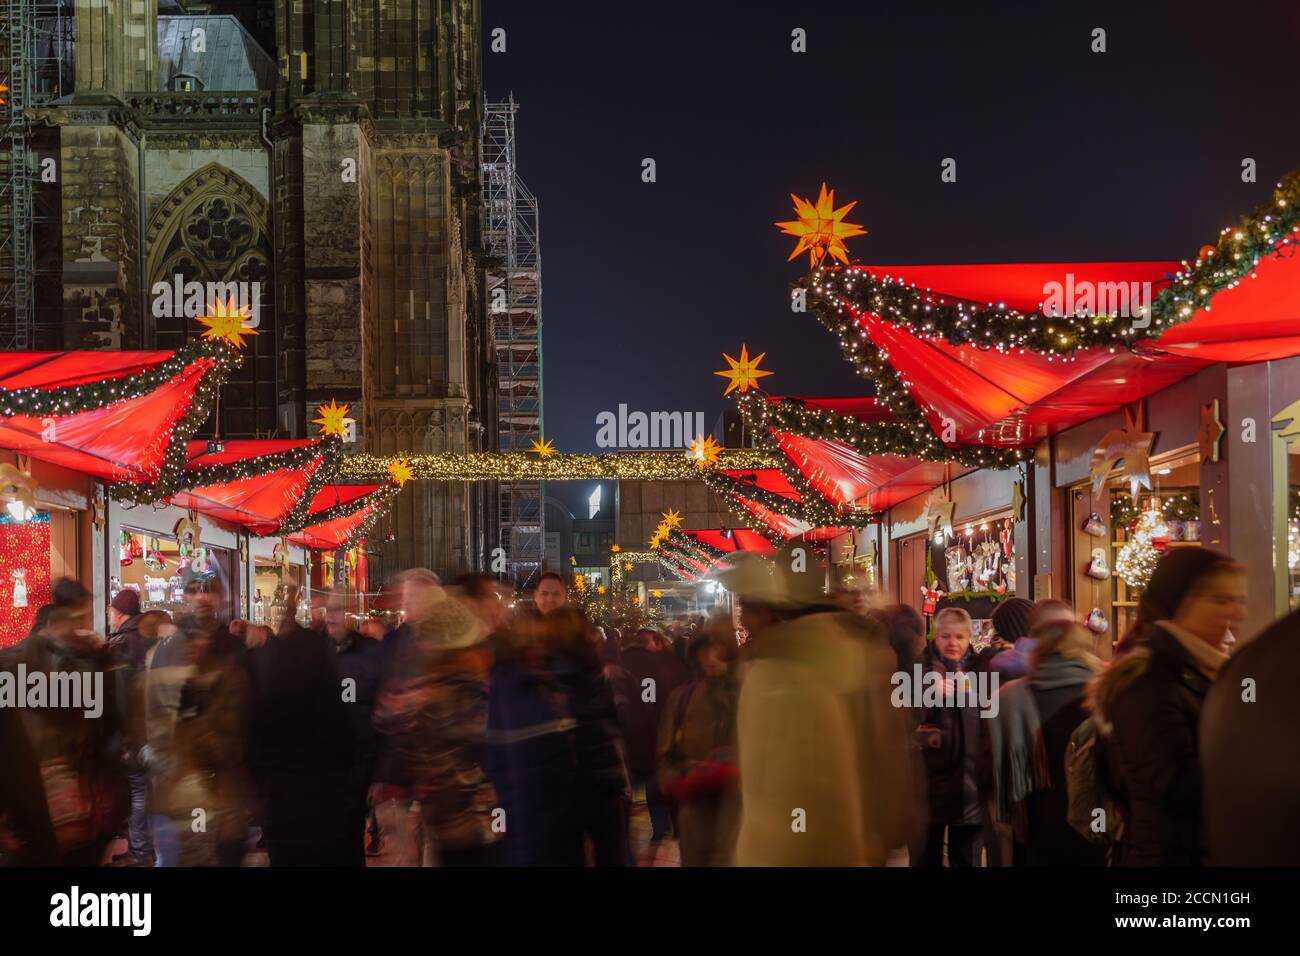 Night scenery, Weihnachtsmarkt, Christmas Market in Köln, with various decorated illuminate stalls in front of Christmas tree and Cologne Cathedral. Stock Photo